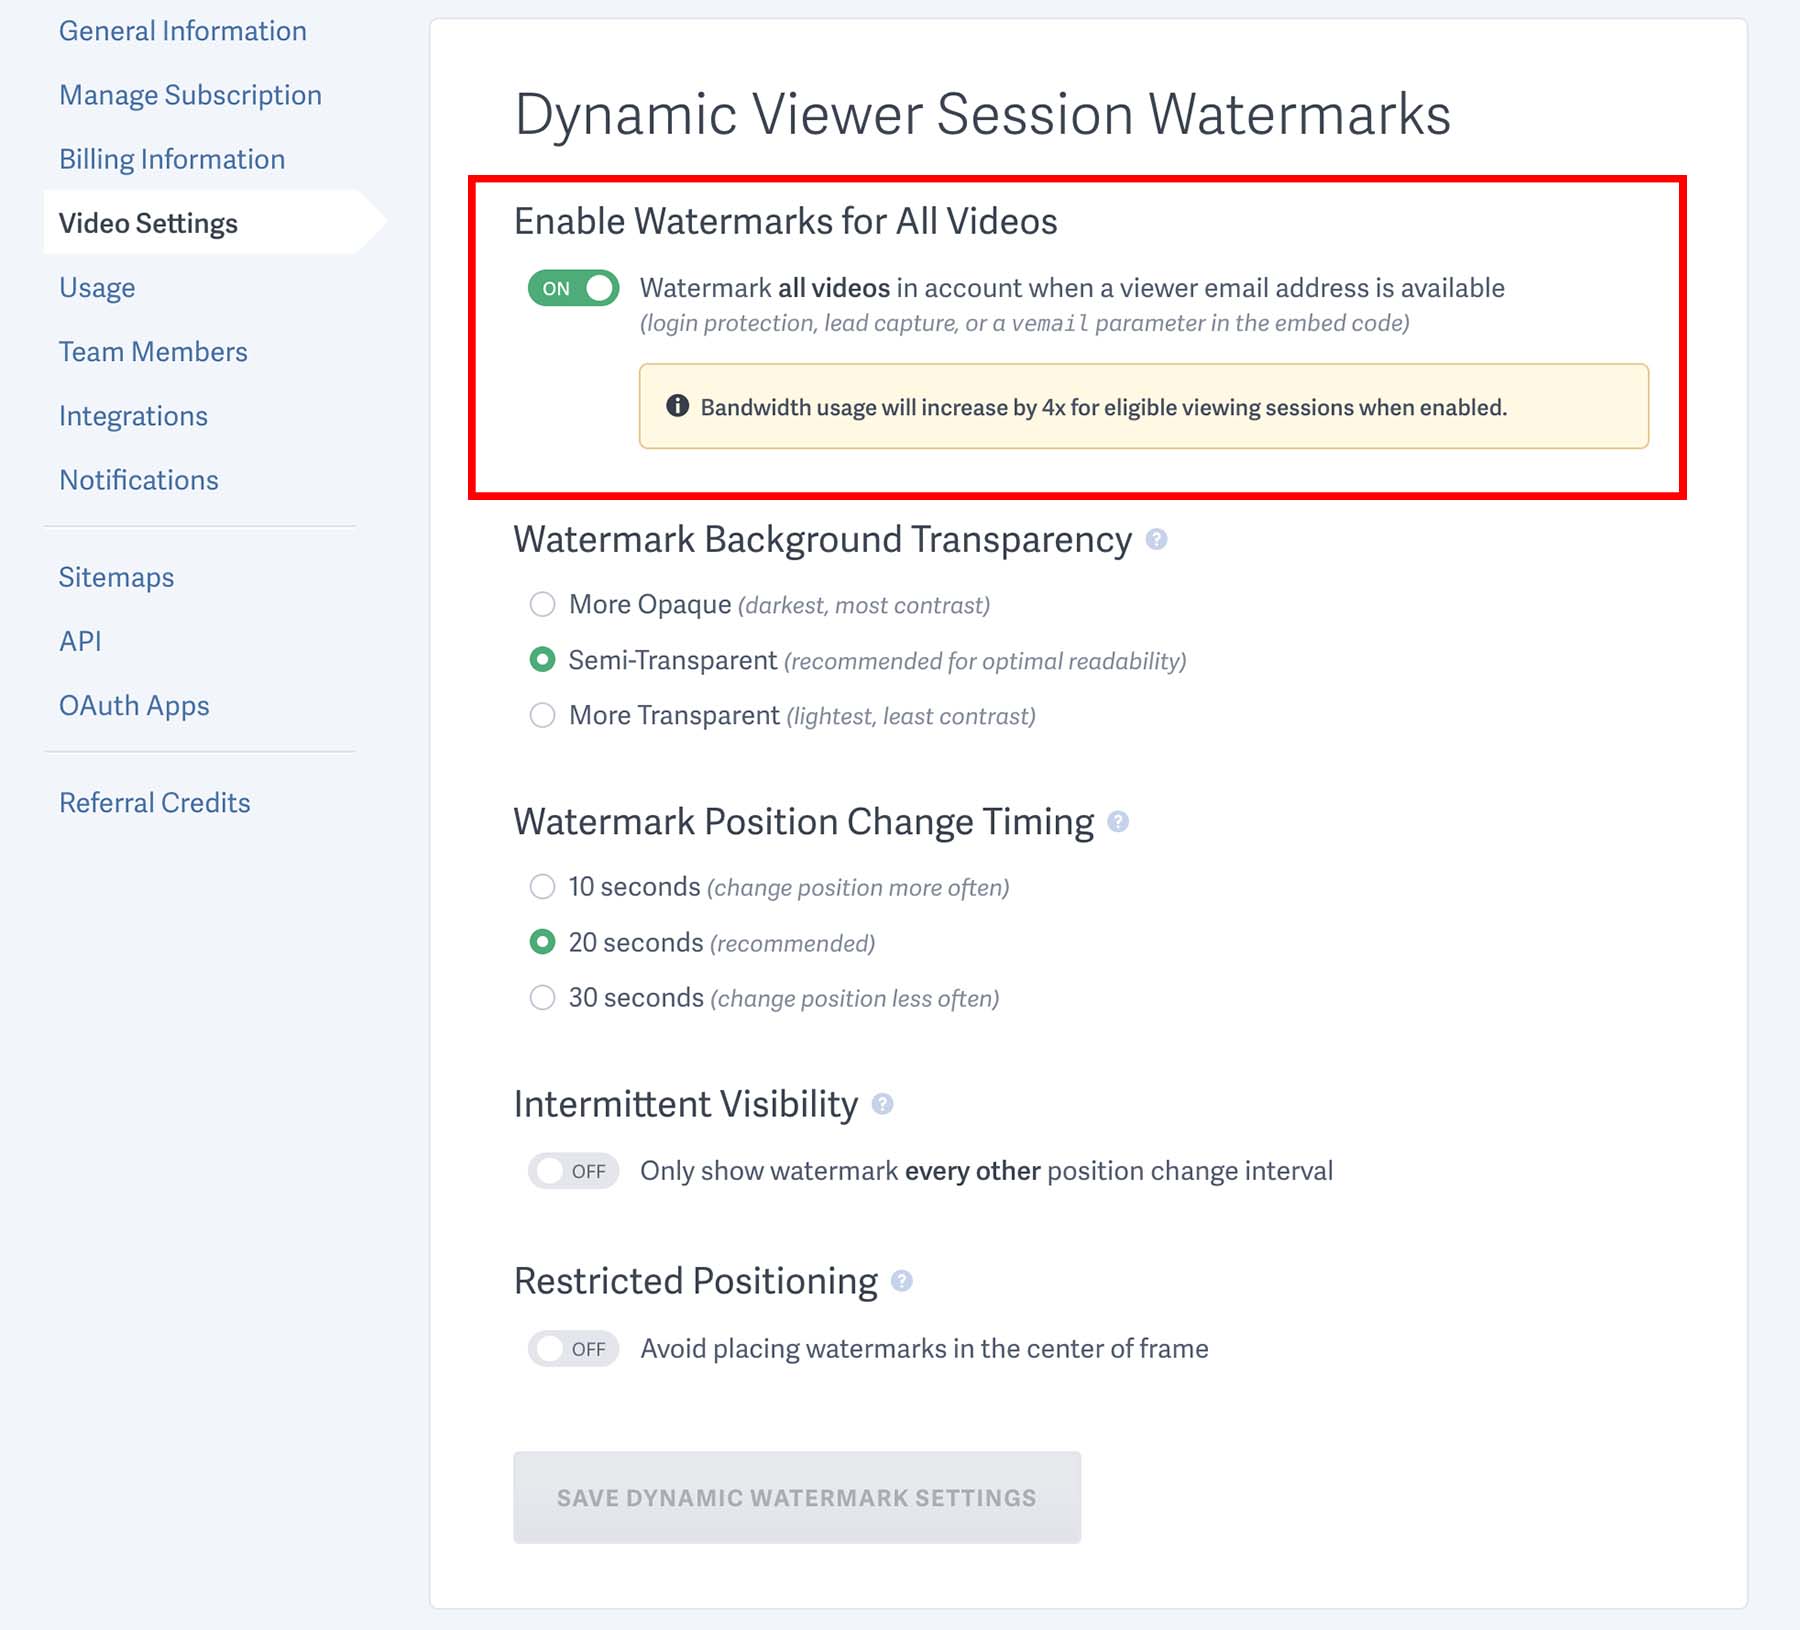 Account-wide settings for Dynamic Viewer Session Watermarks